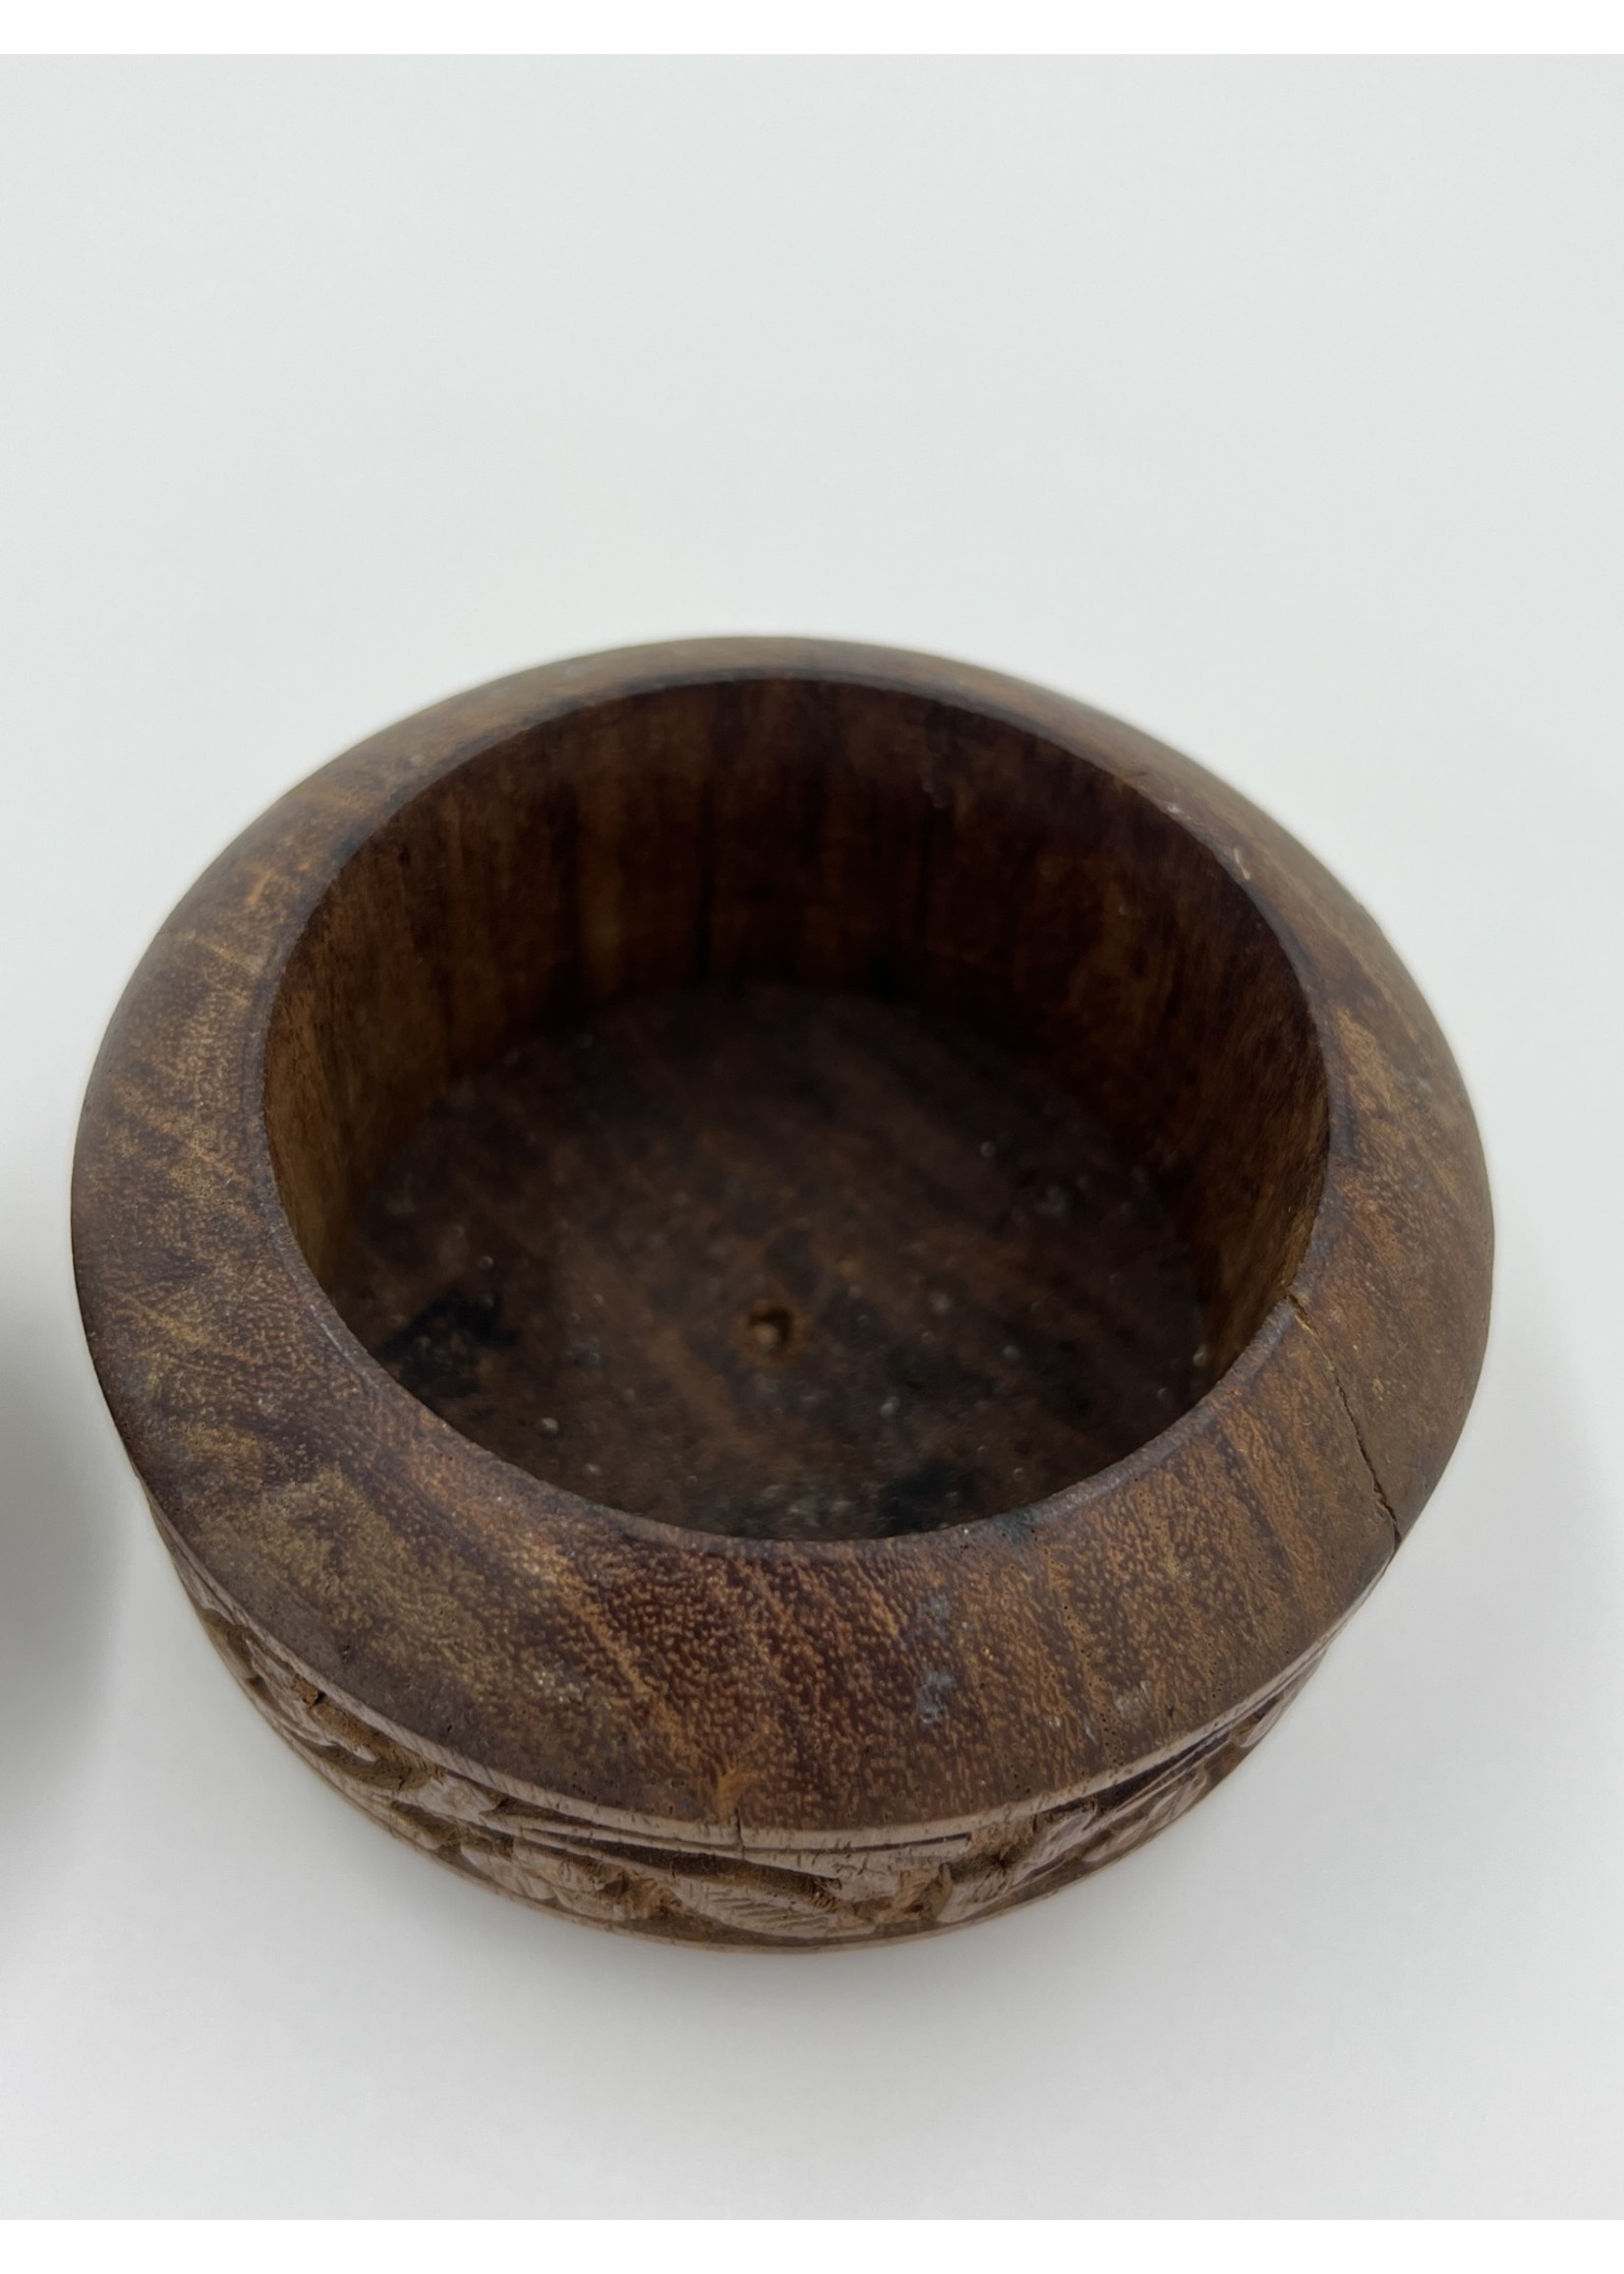 Other Things Hand Carved Wooden Box Round